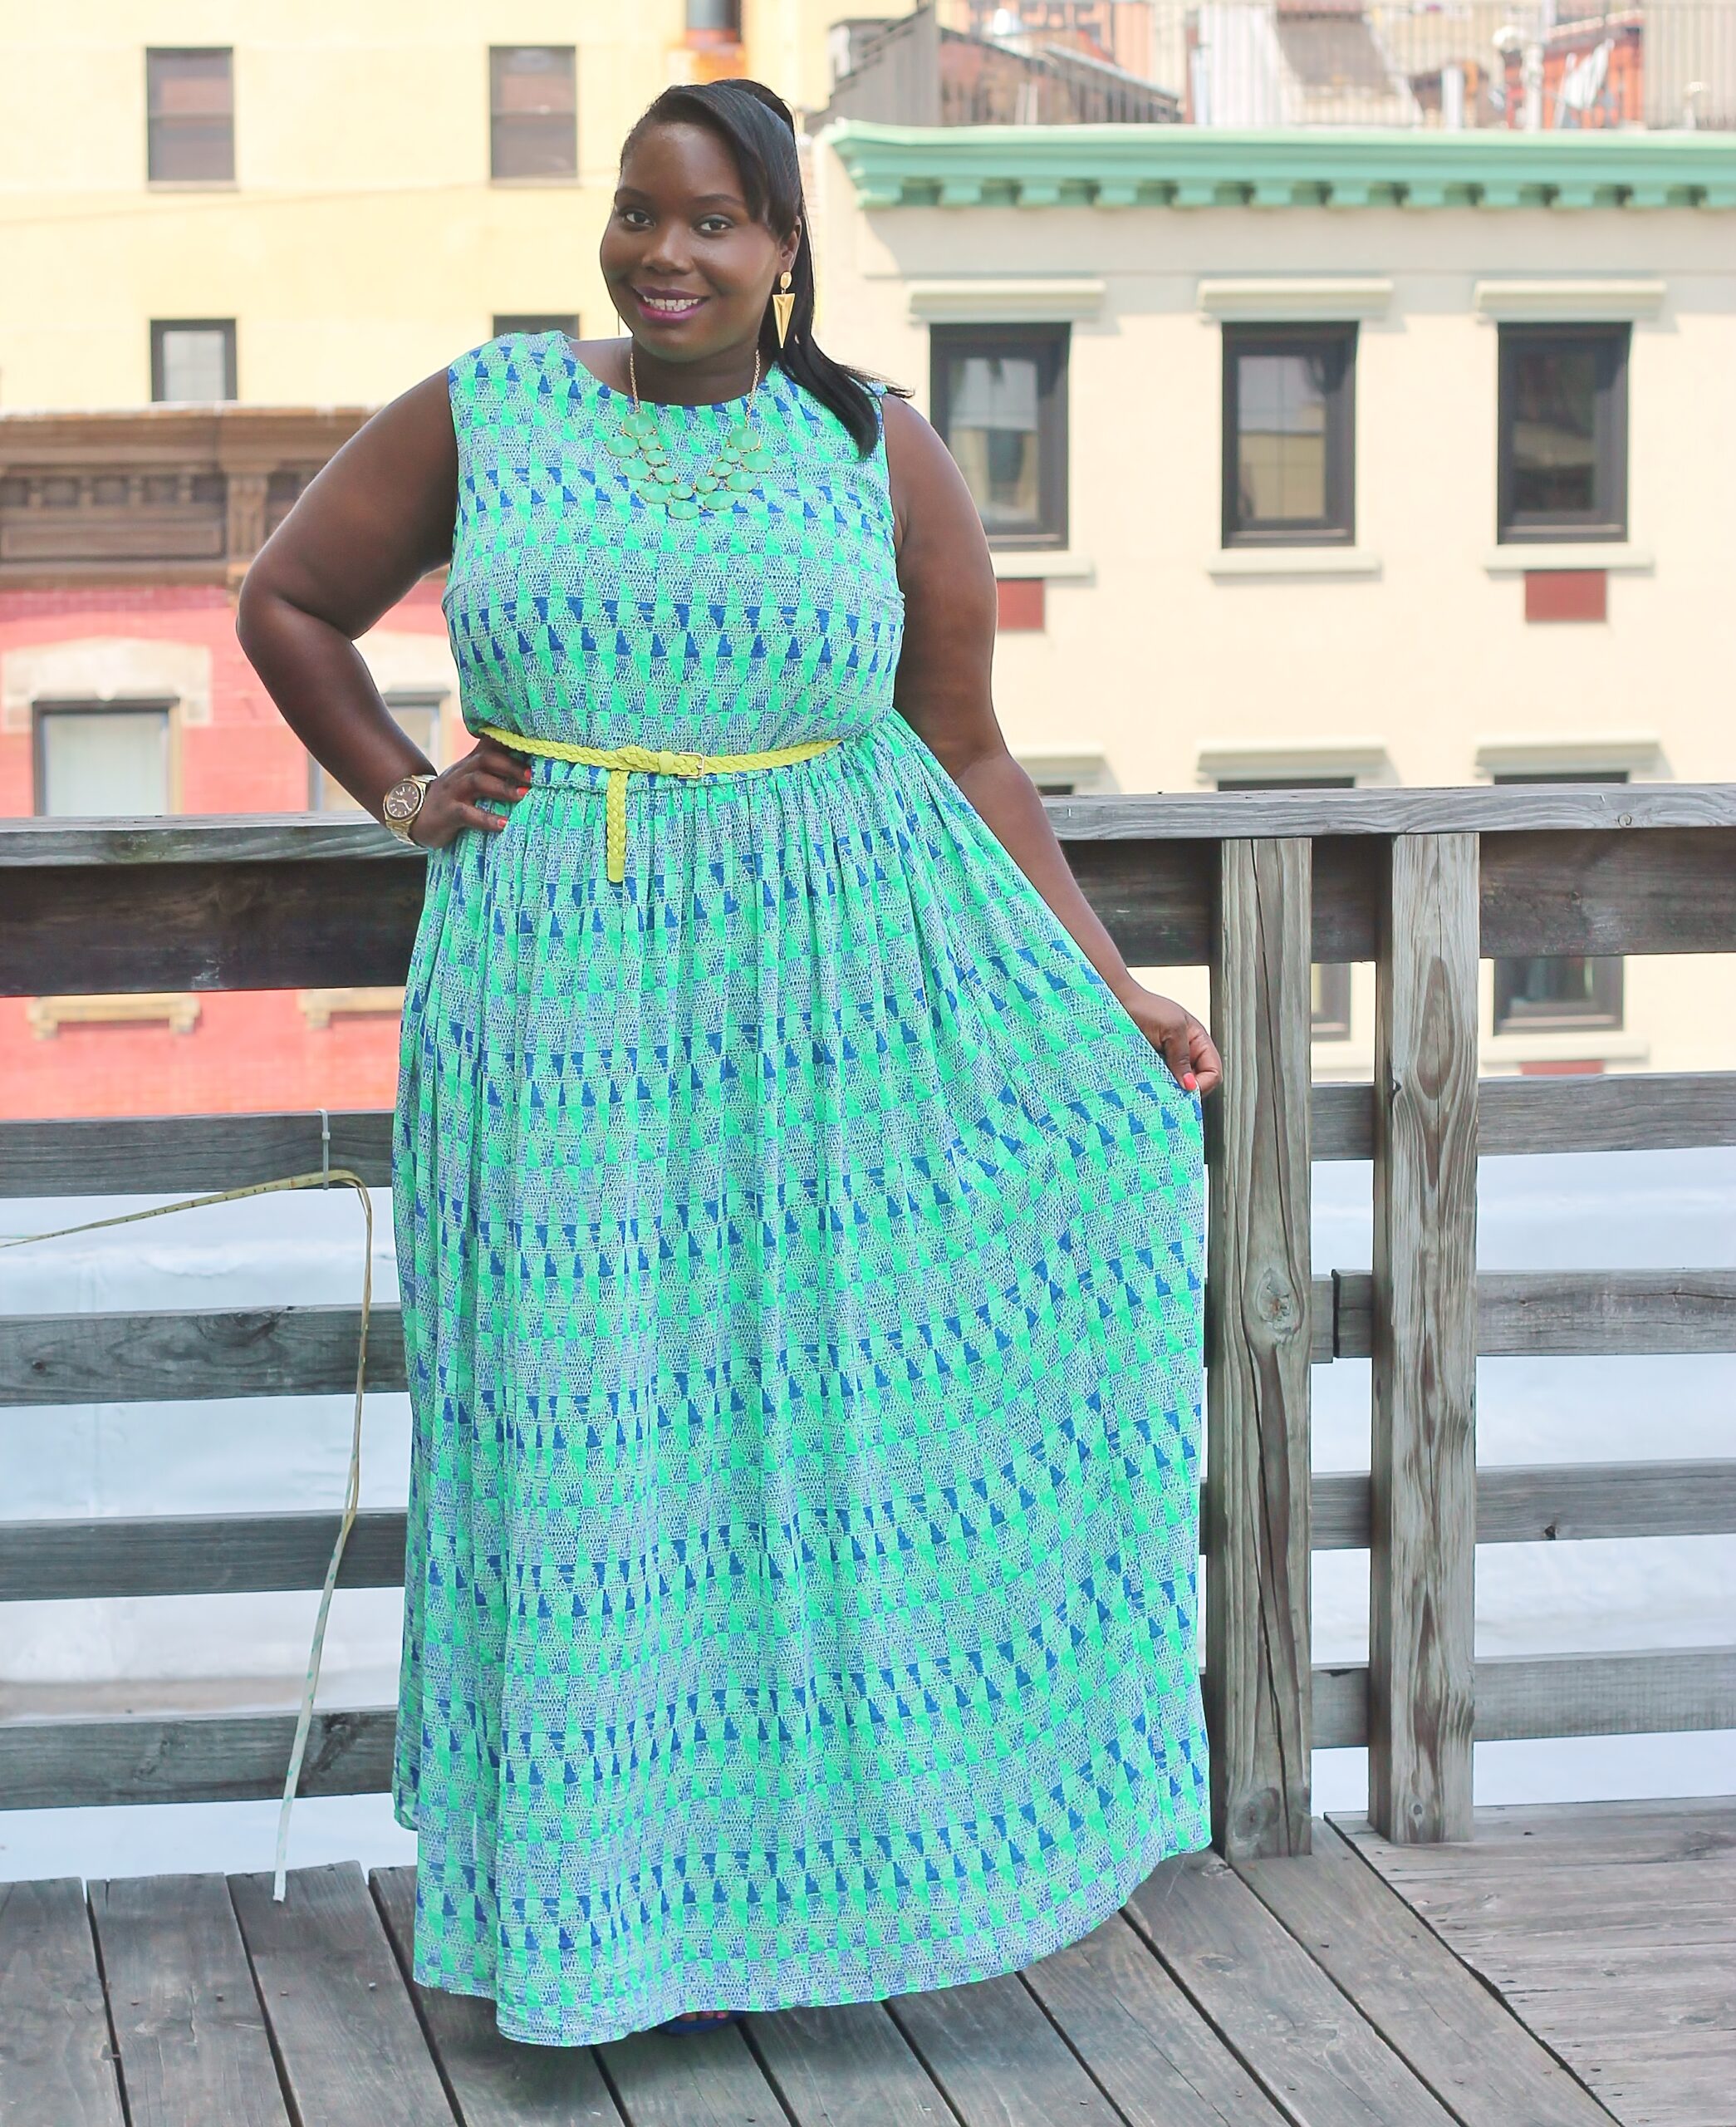 STYLE JOURNEY: TAKING IT TO THE MAX IN A KOKO FOR SIMPLY BE PLUS SIZE MAXI DRESS